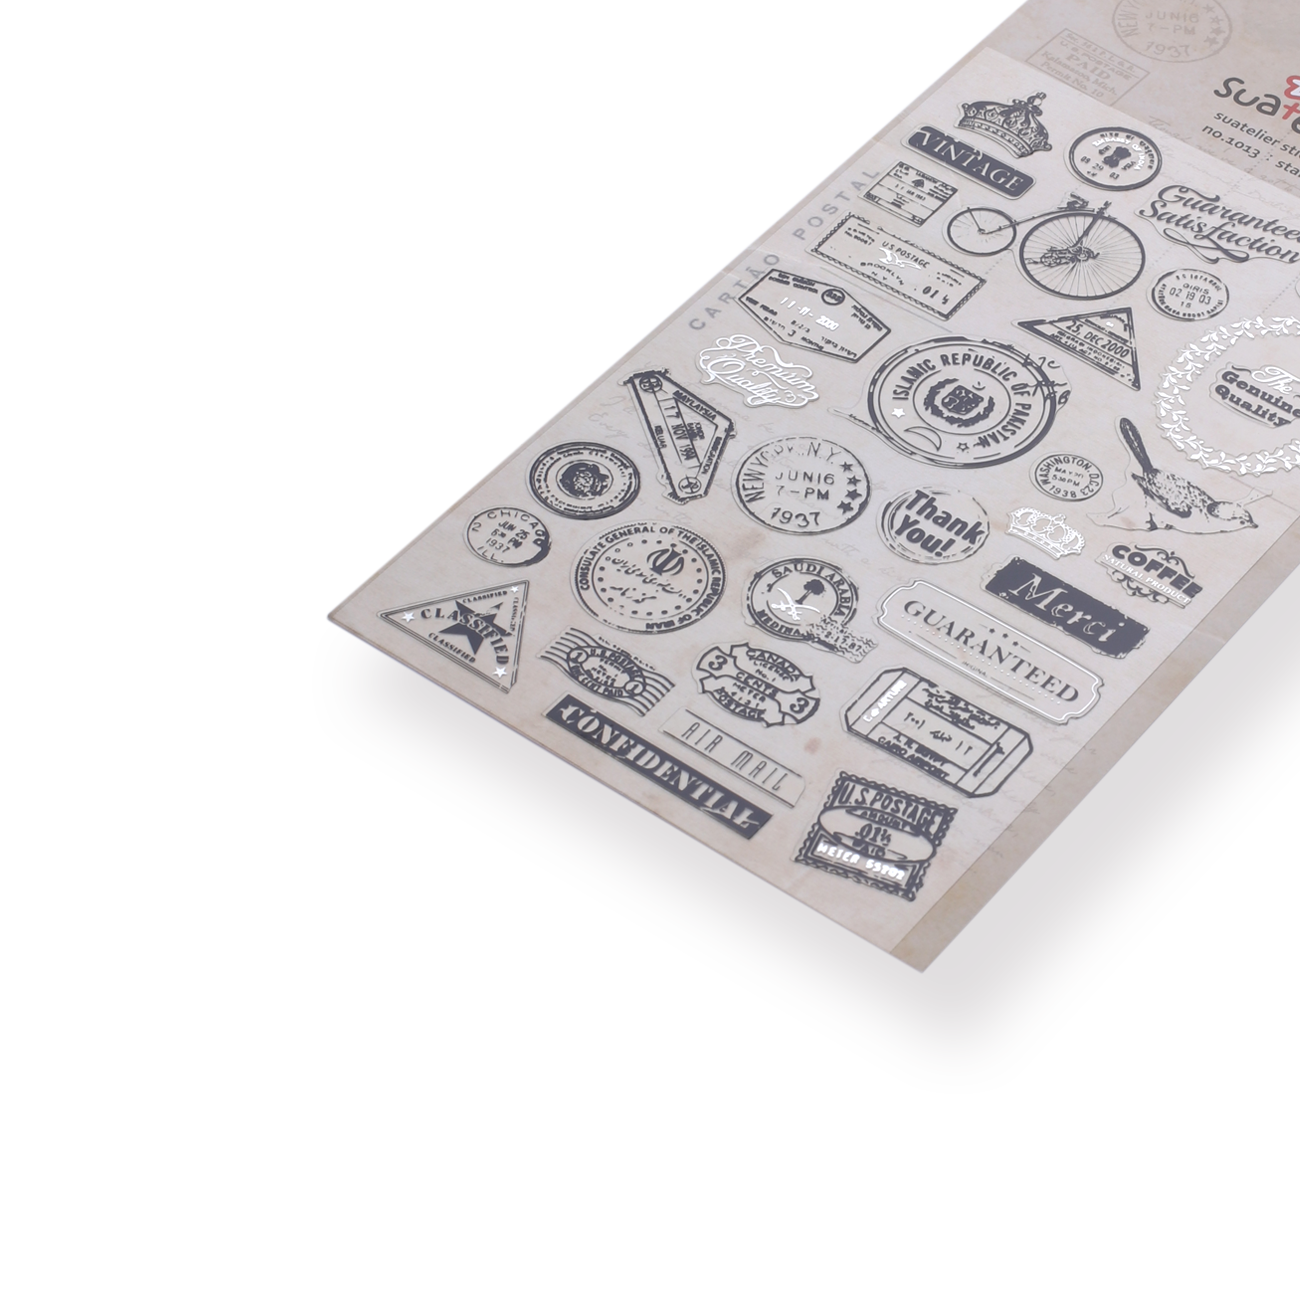 Suatelier Stamp Stickers - Stationery Pal